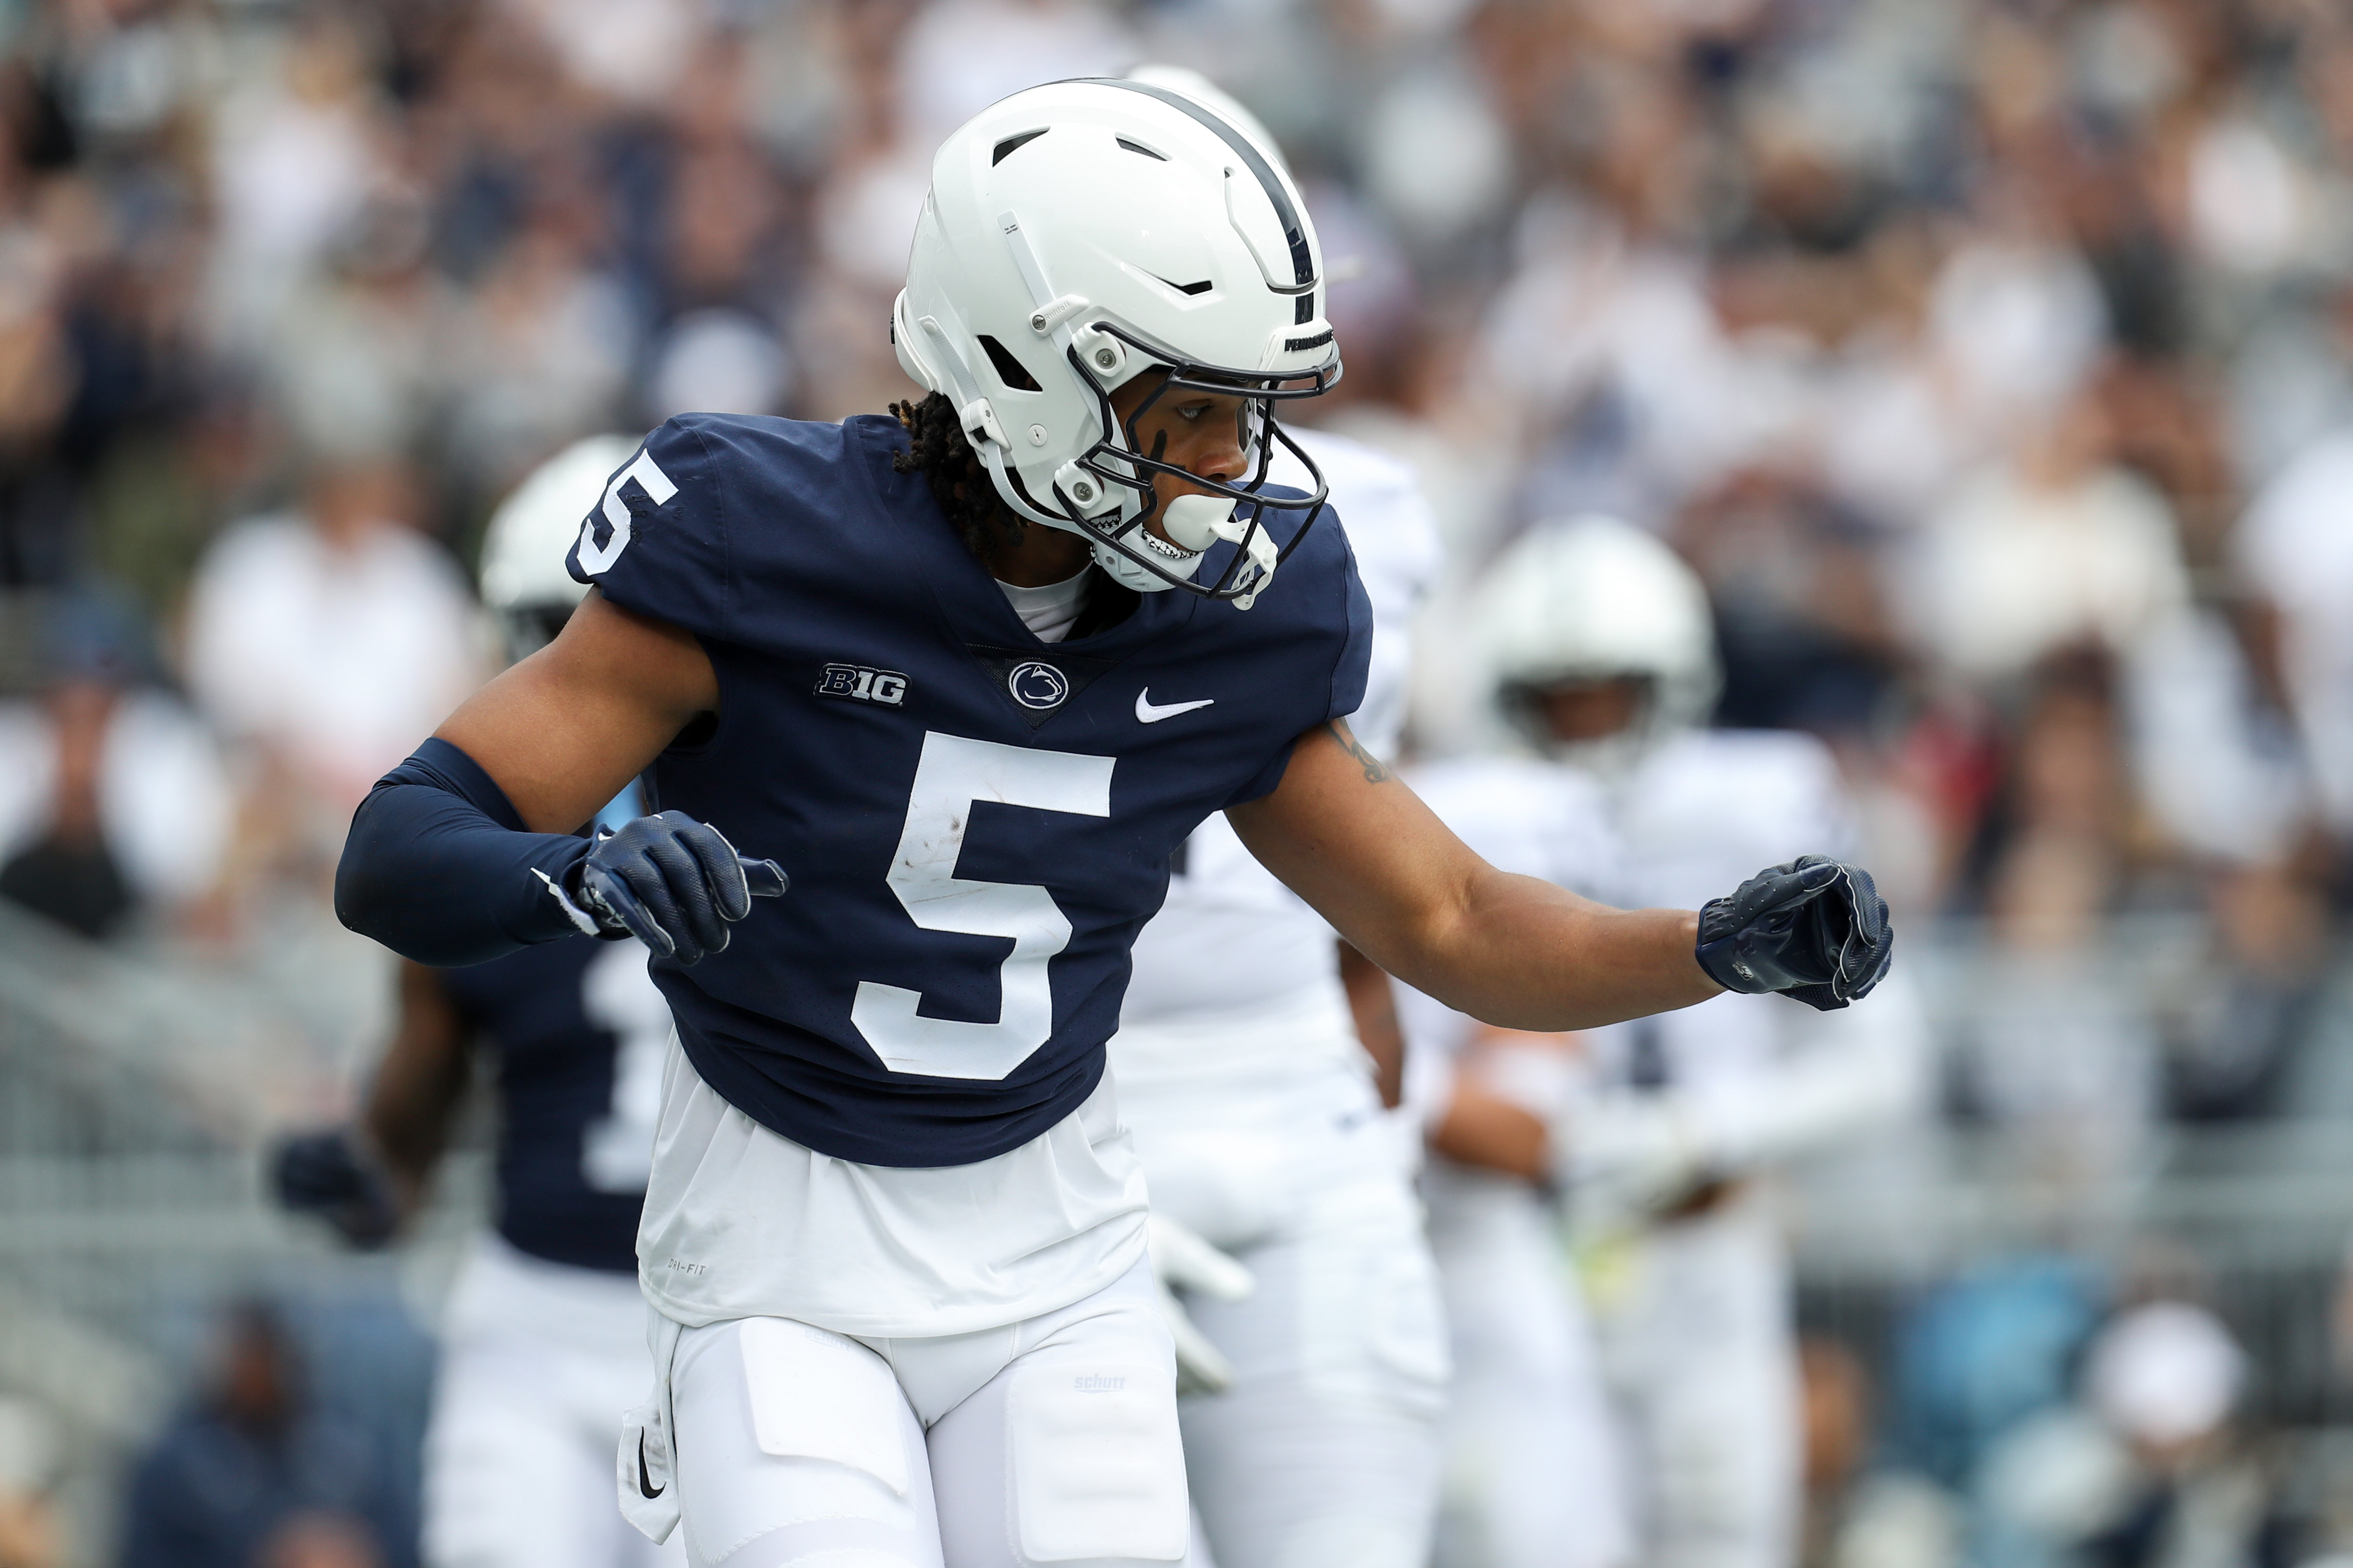 Apr 15, 2023; University Park, PA, USA; Penn State Nittany Lions wide receiver Omari Evans (5) celebrates after scoring a touchdown during the first quarter of the Blue White spring game at Beaver Stadium. The Blue team defeated the White team 10-0.